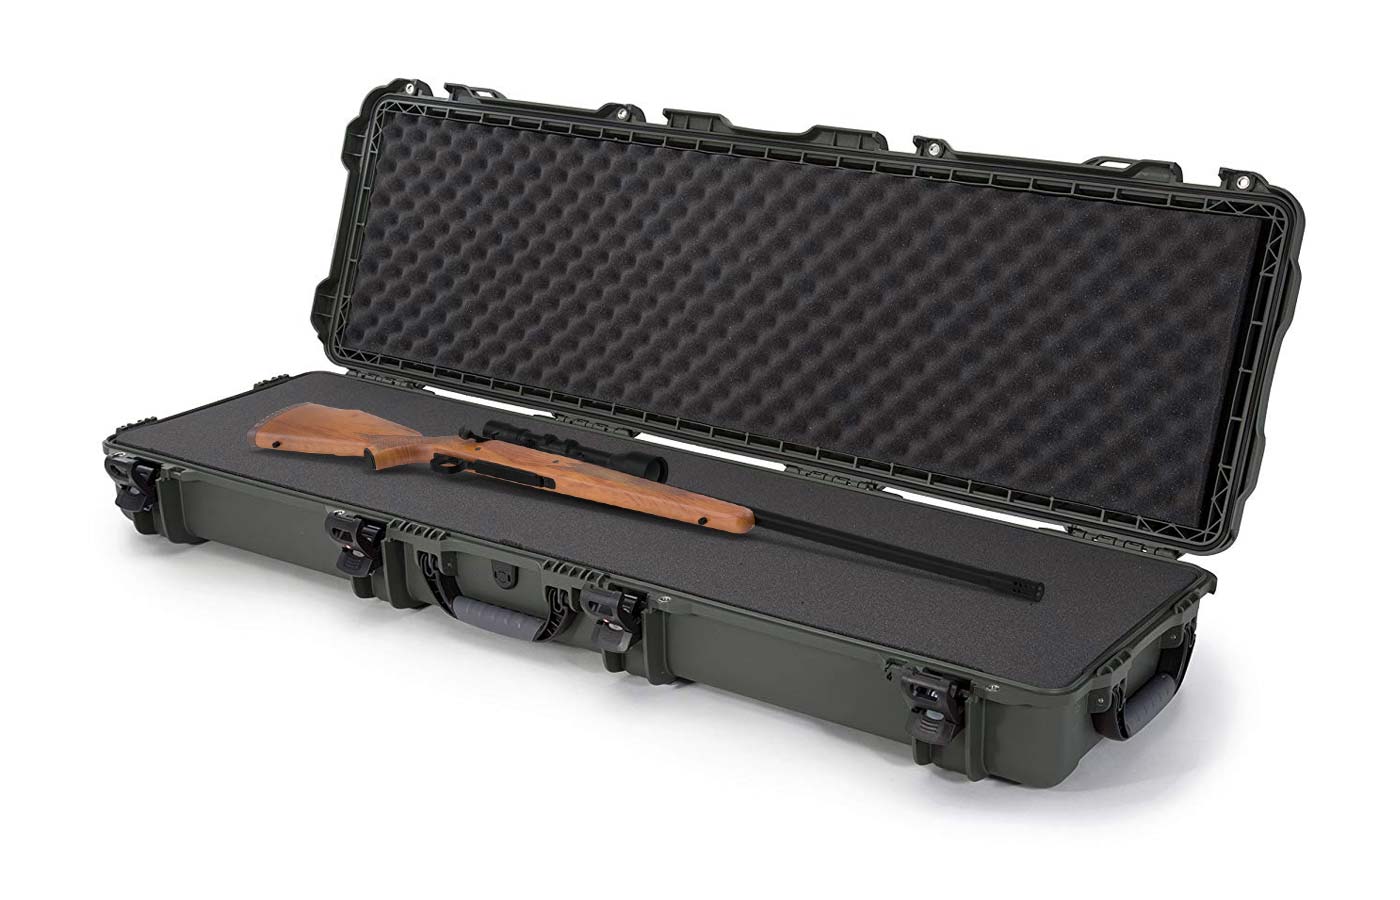 Nanuk 995 rifle case with a Winchester Model 70